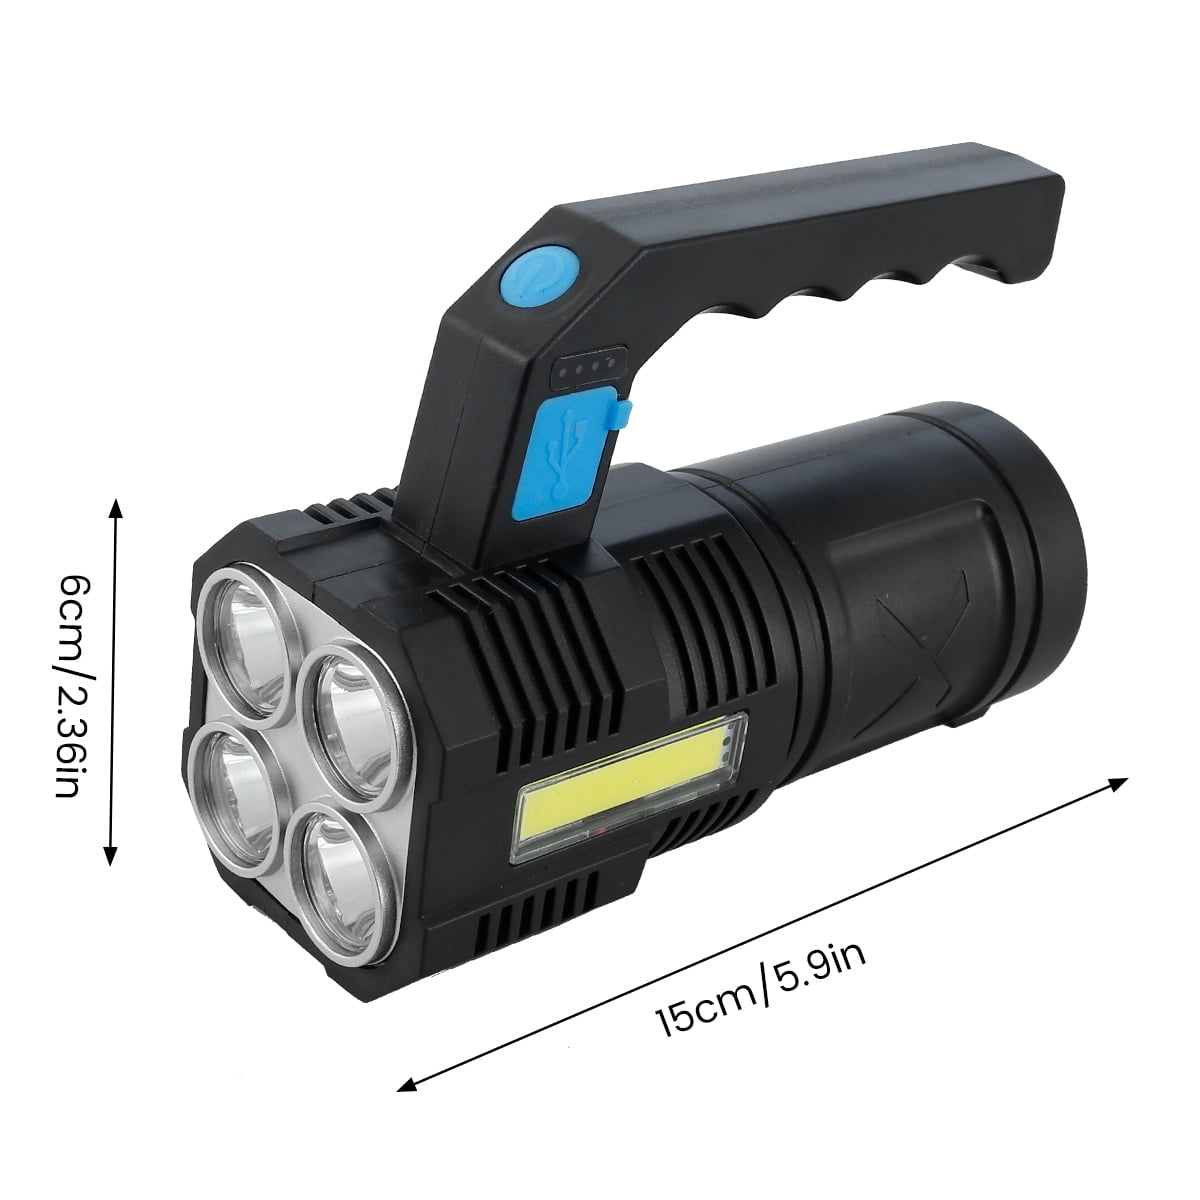 NEW 18 LED TORCH MULTI FUNCTION PORTABLE HANDHELD FLASHLIGHT SEARCHLIGHT CAMPING 